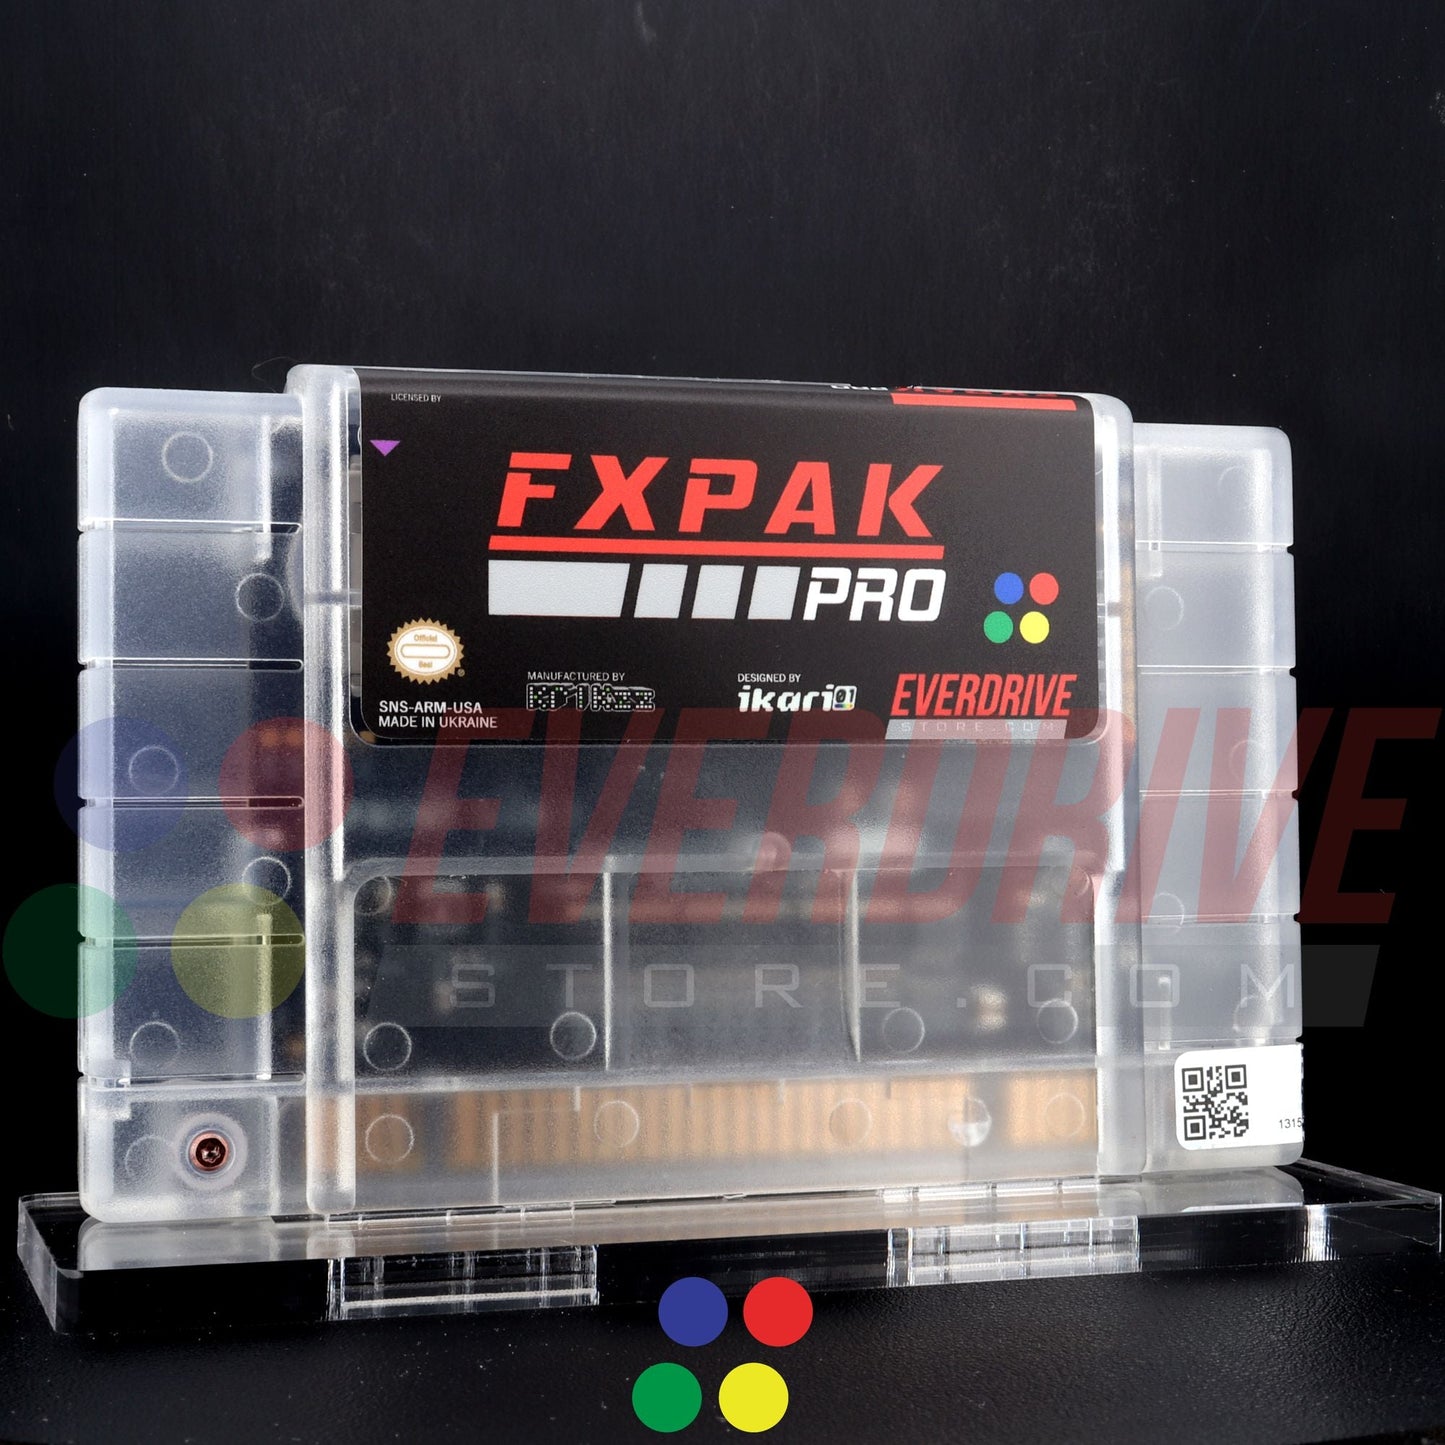 FXPAK PRO NAS - Frosted Clear